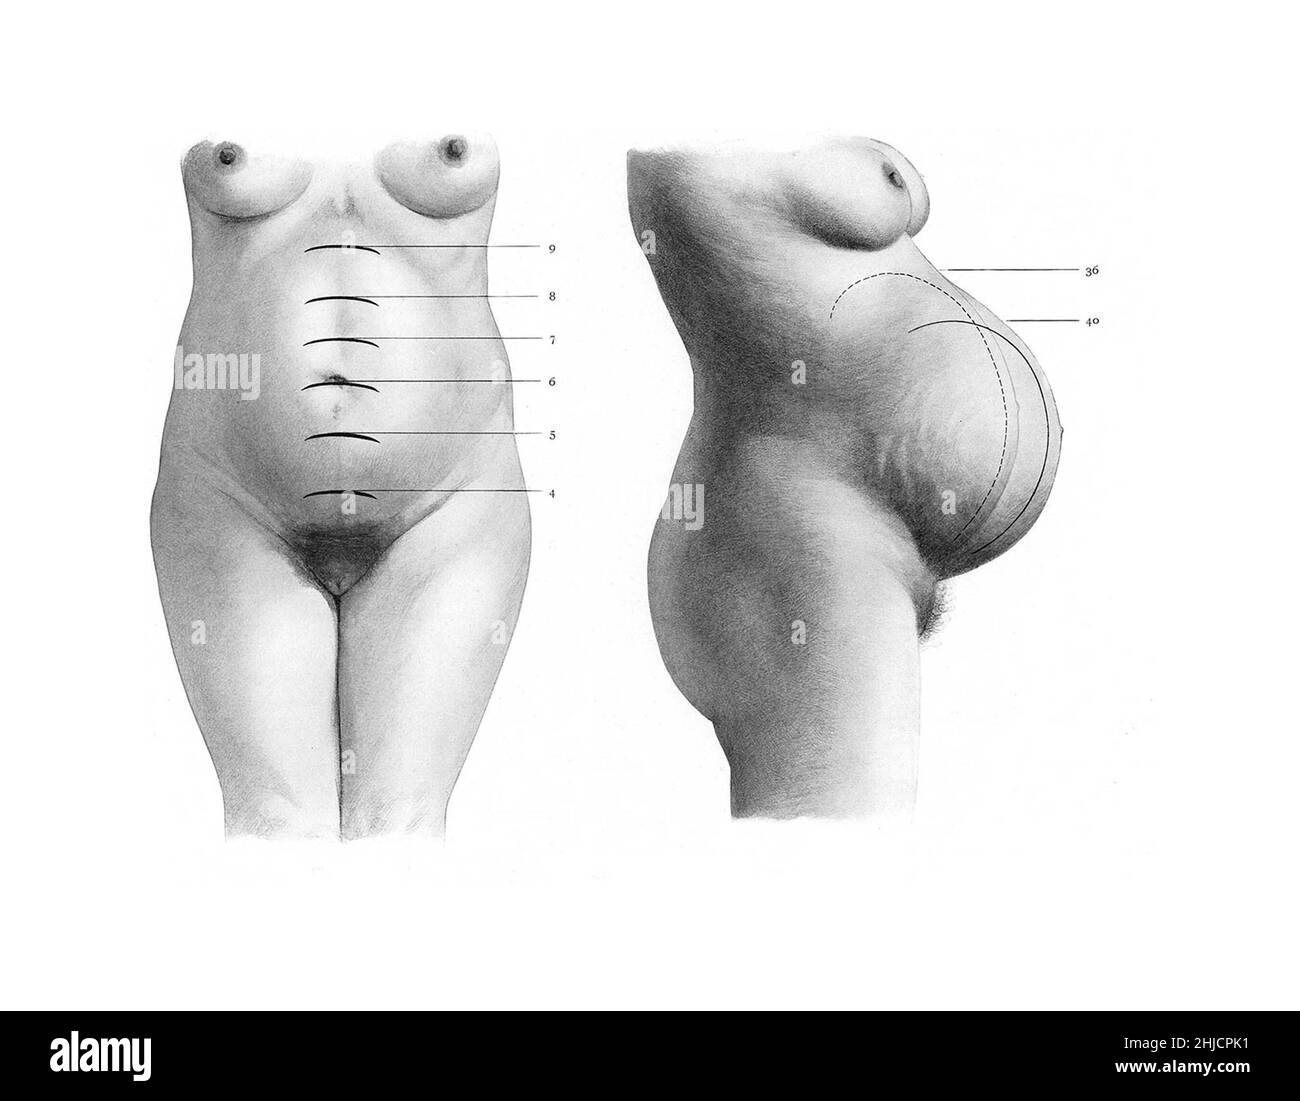 During pregnancy, the uterus expands, making up a larger and larger portion of the woman's abdomen. At left is the anterior view with months labeled; at right is a lateral view labeling the last 4 weeks. During the final stages of gestation before childbirth, the fetus and uterus will drop to a lower position. Stock Photo